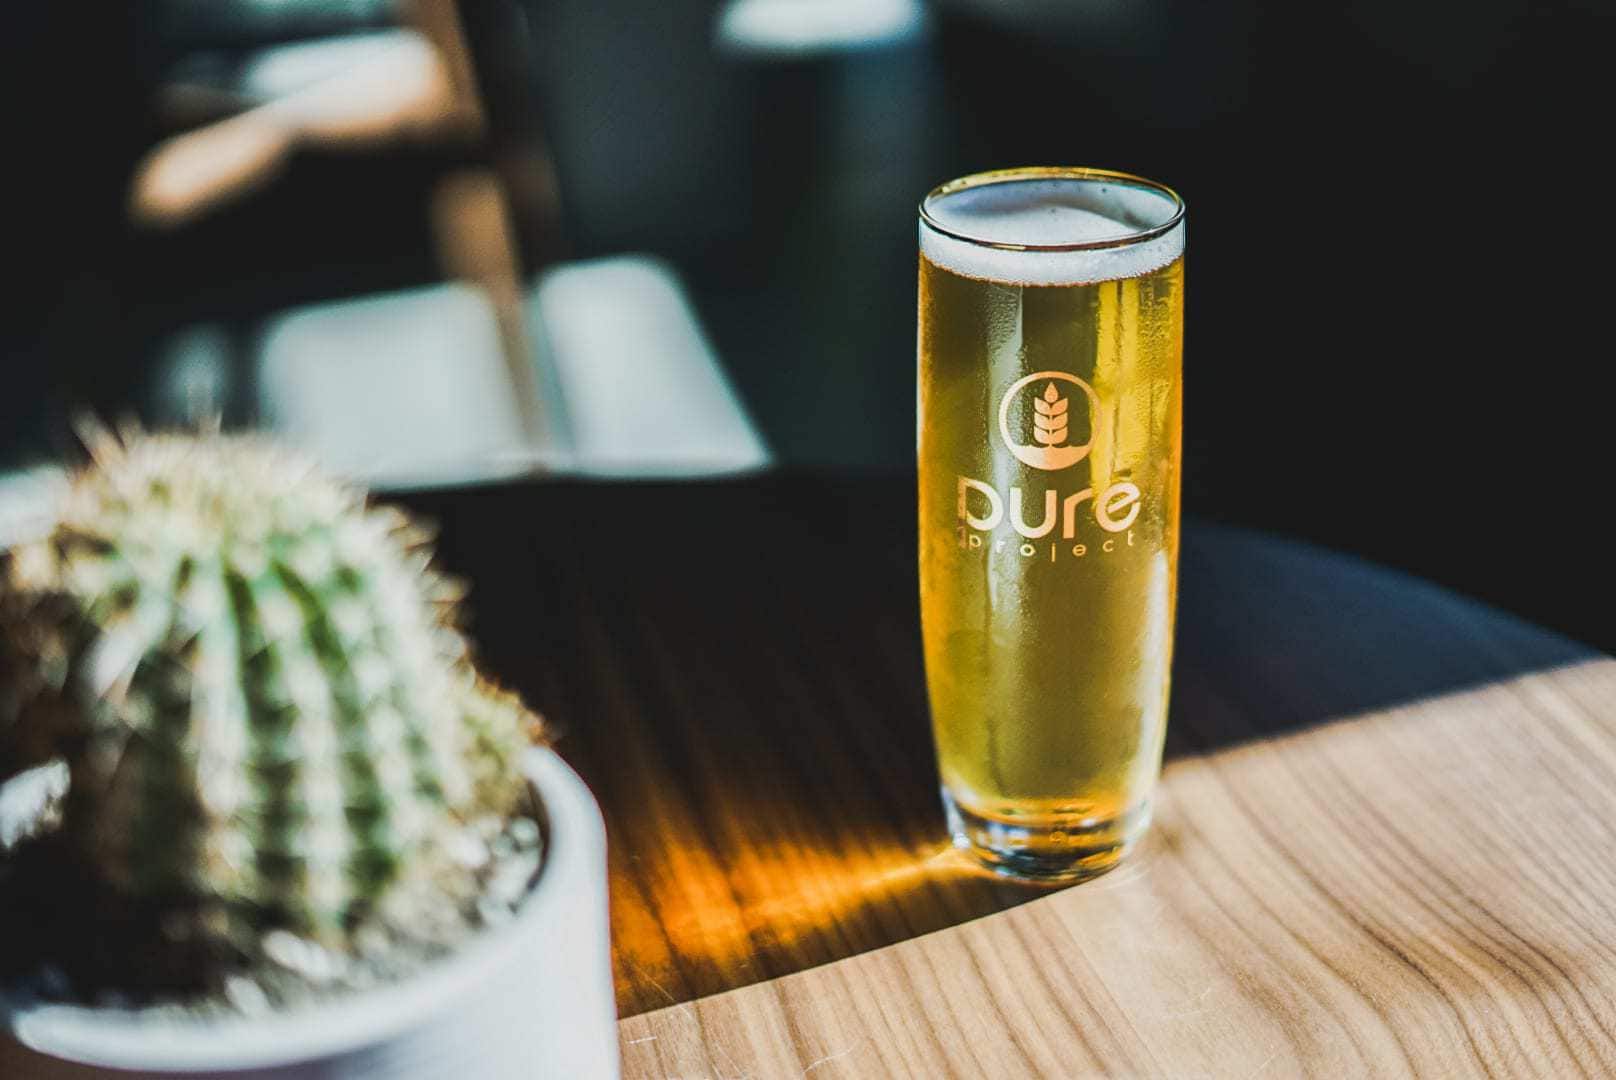 Pure Brewery